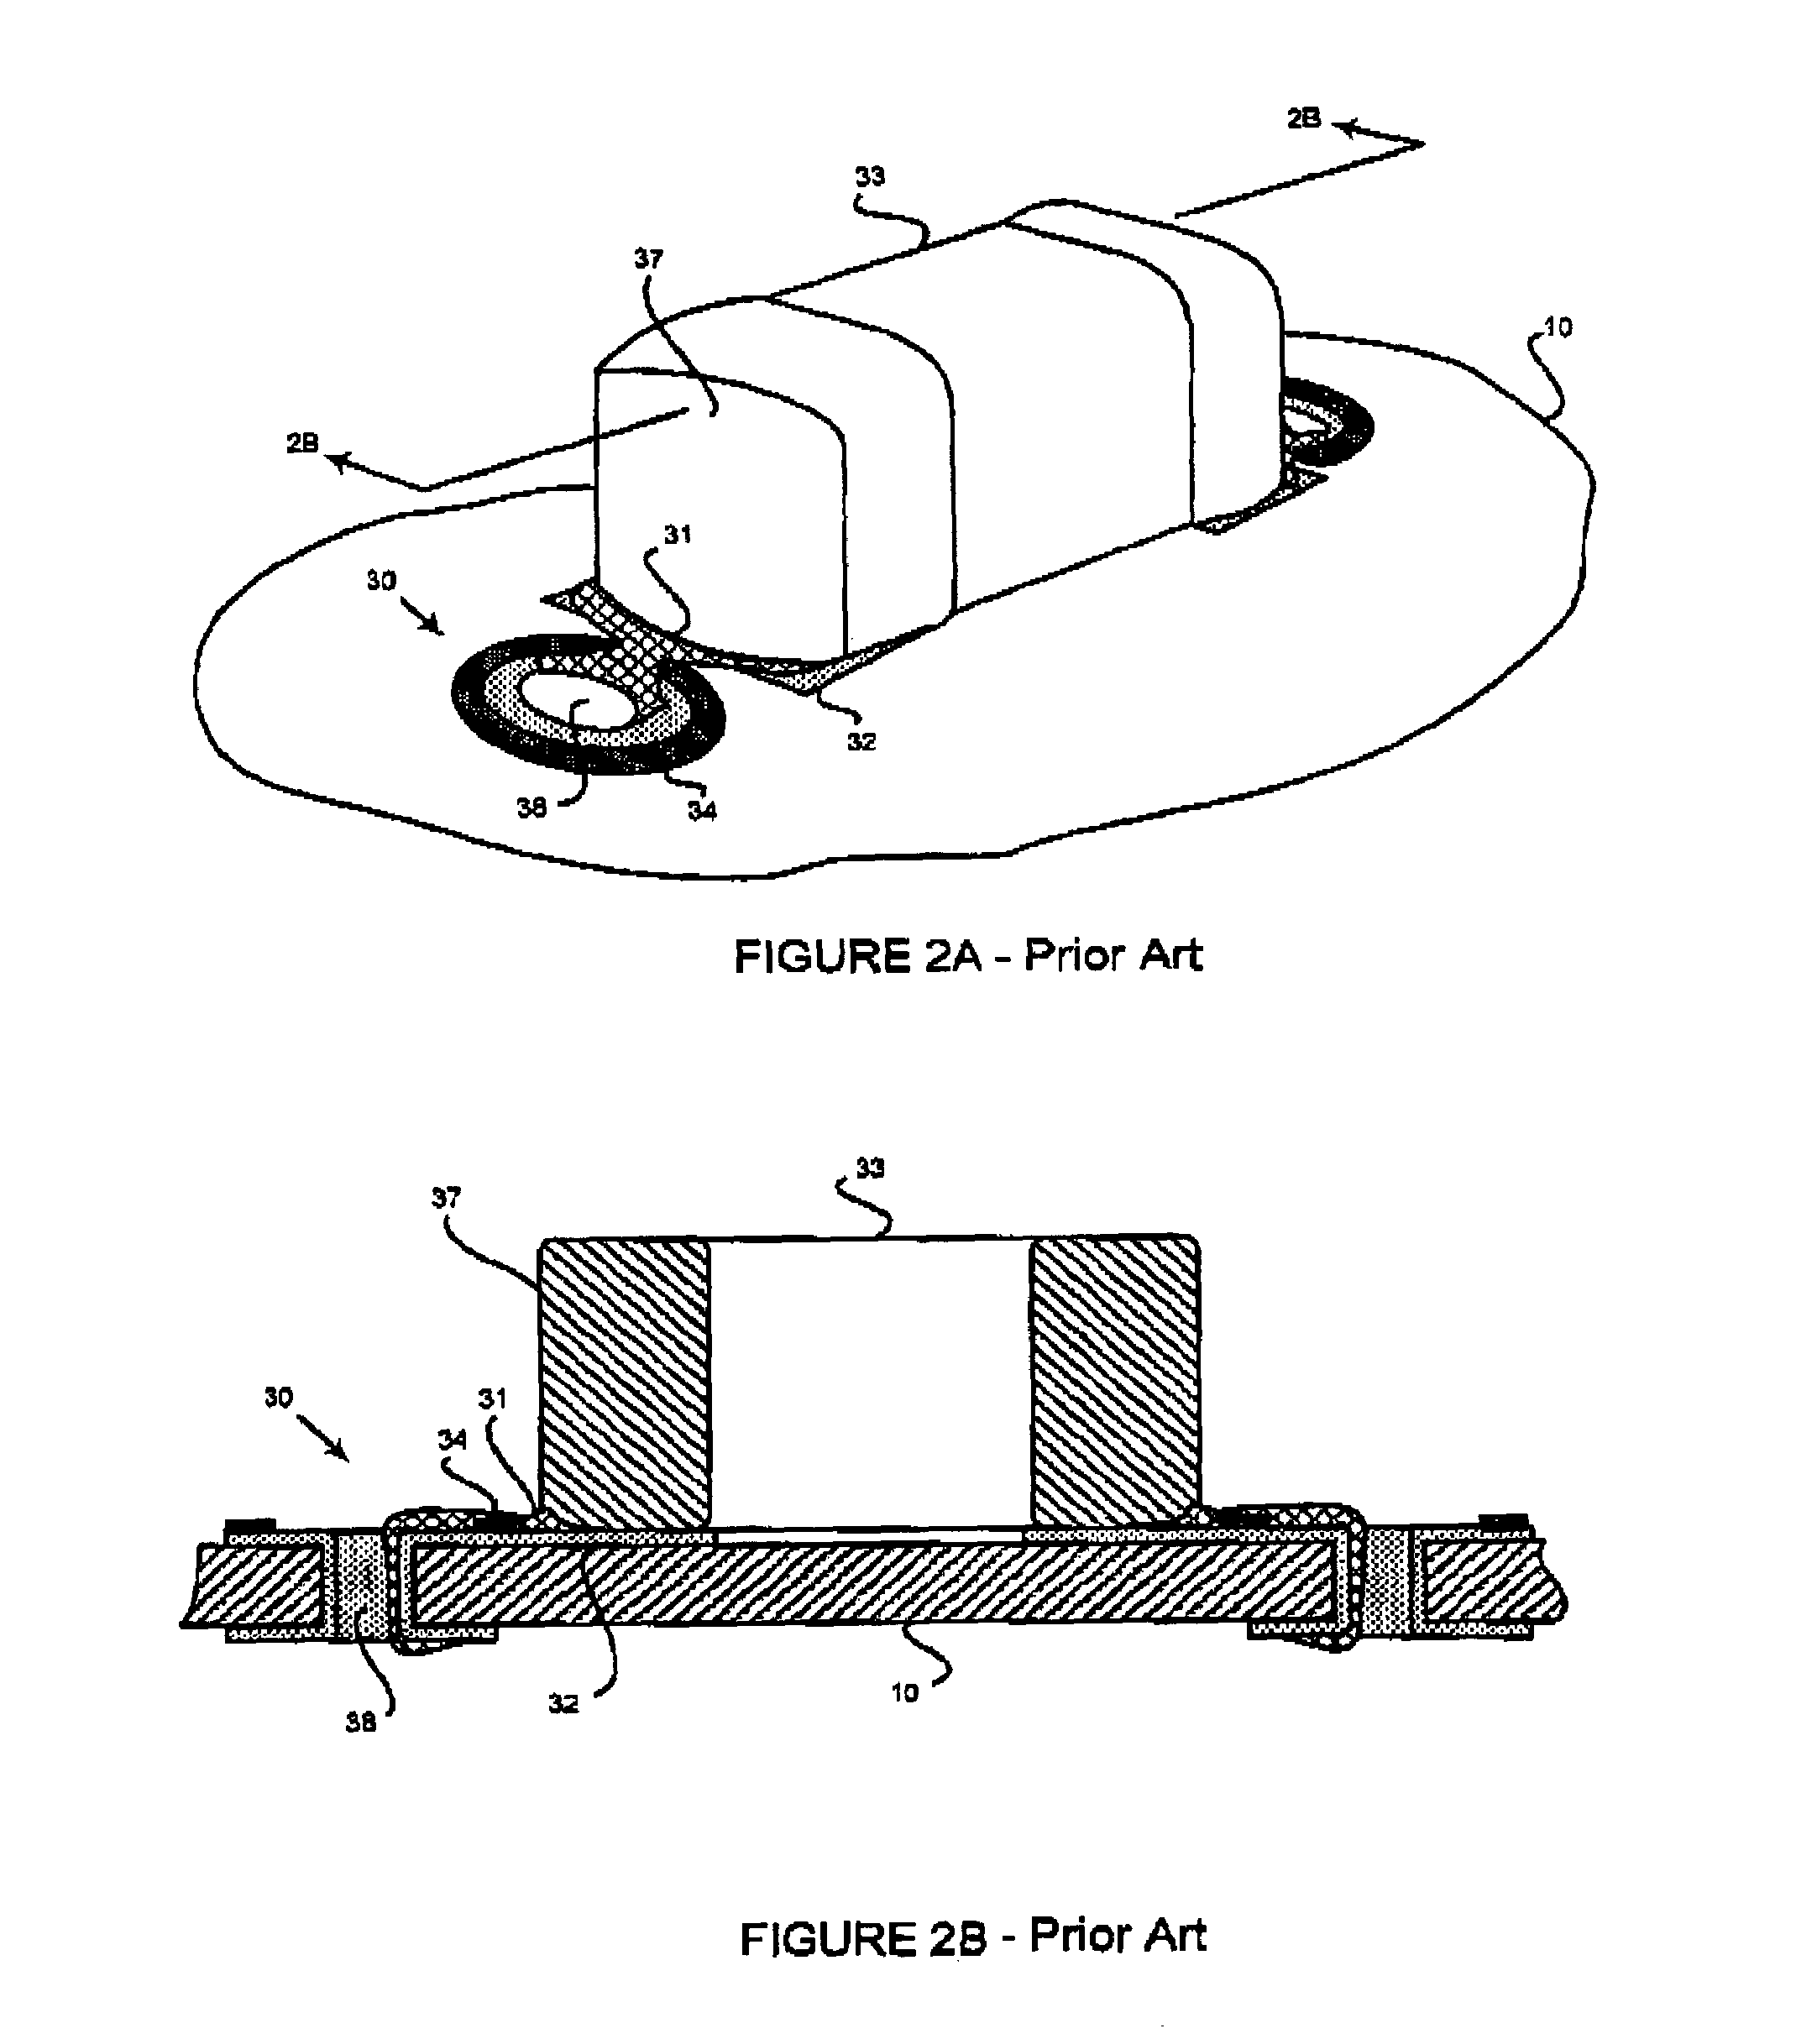 Substrate with via and pad structures